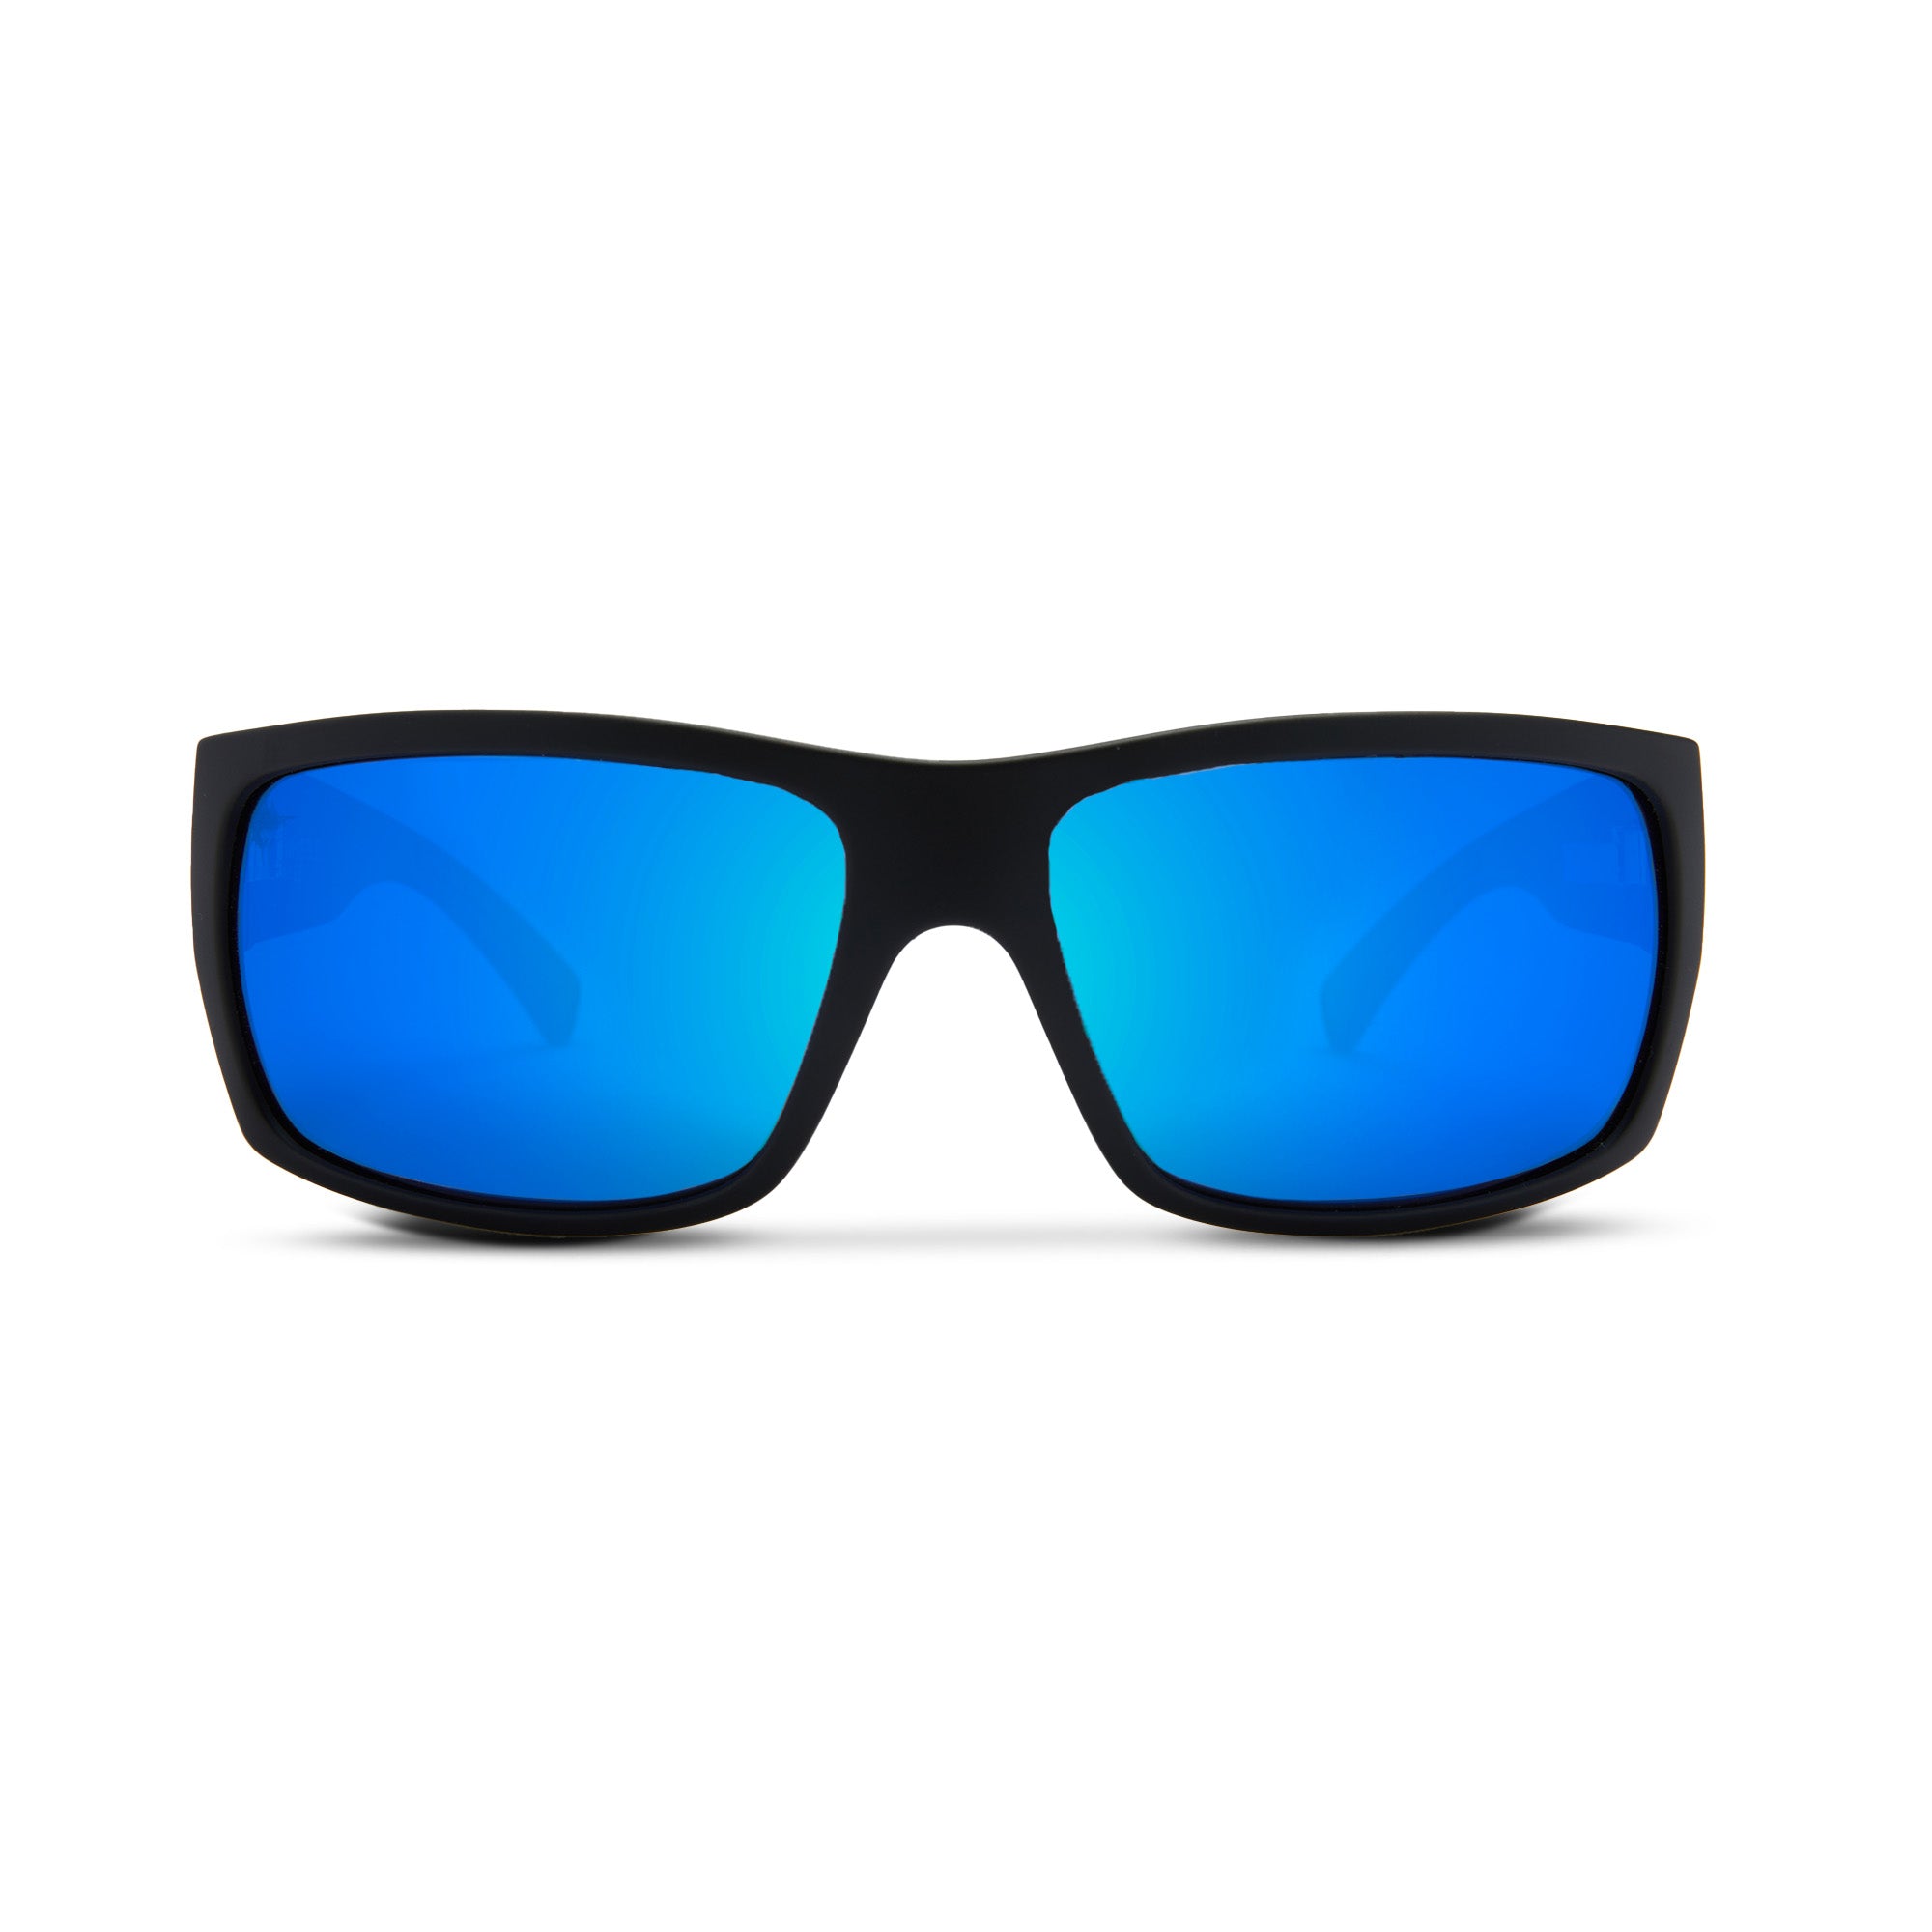 Shadedeye Sport Black with Blue Accent Polarized Sunglasses 85943-16 - The  Home Depot